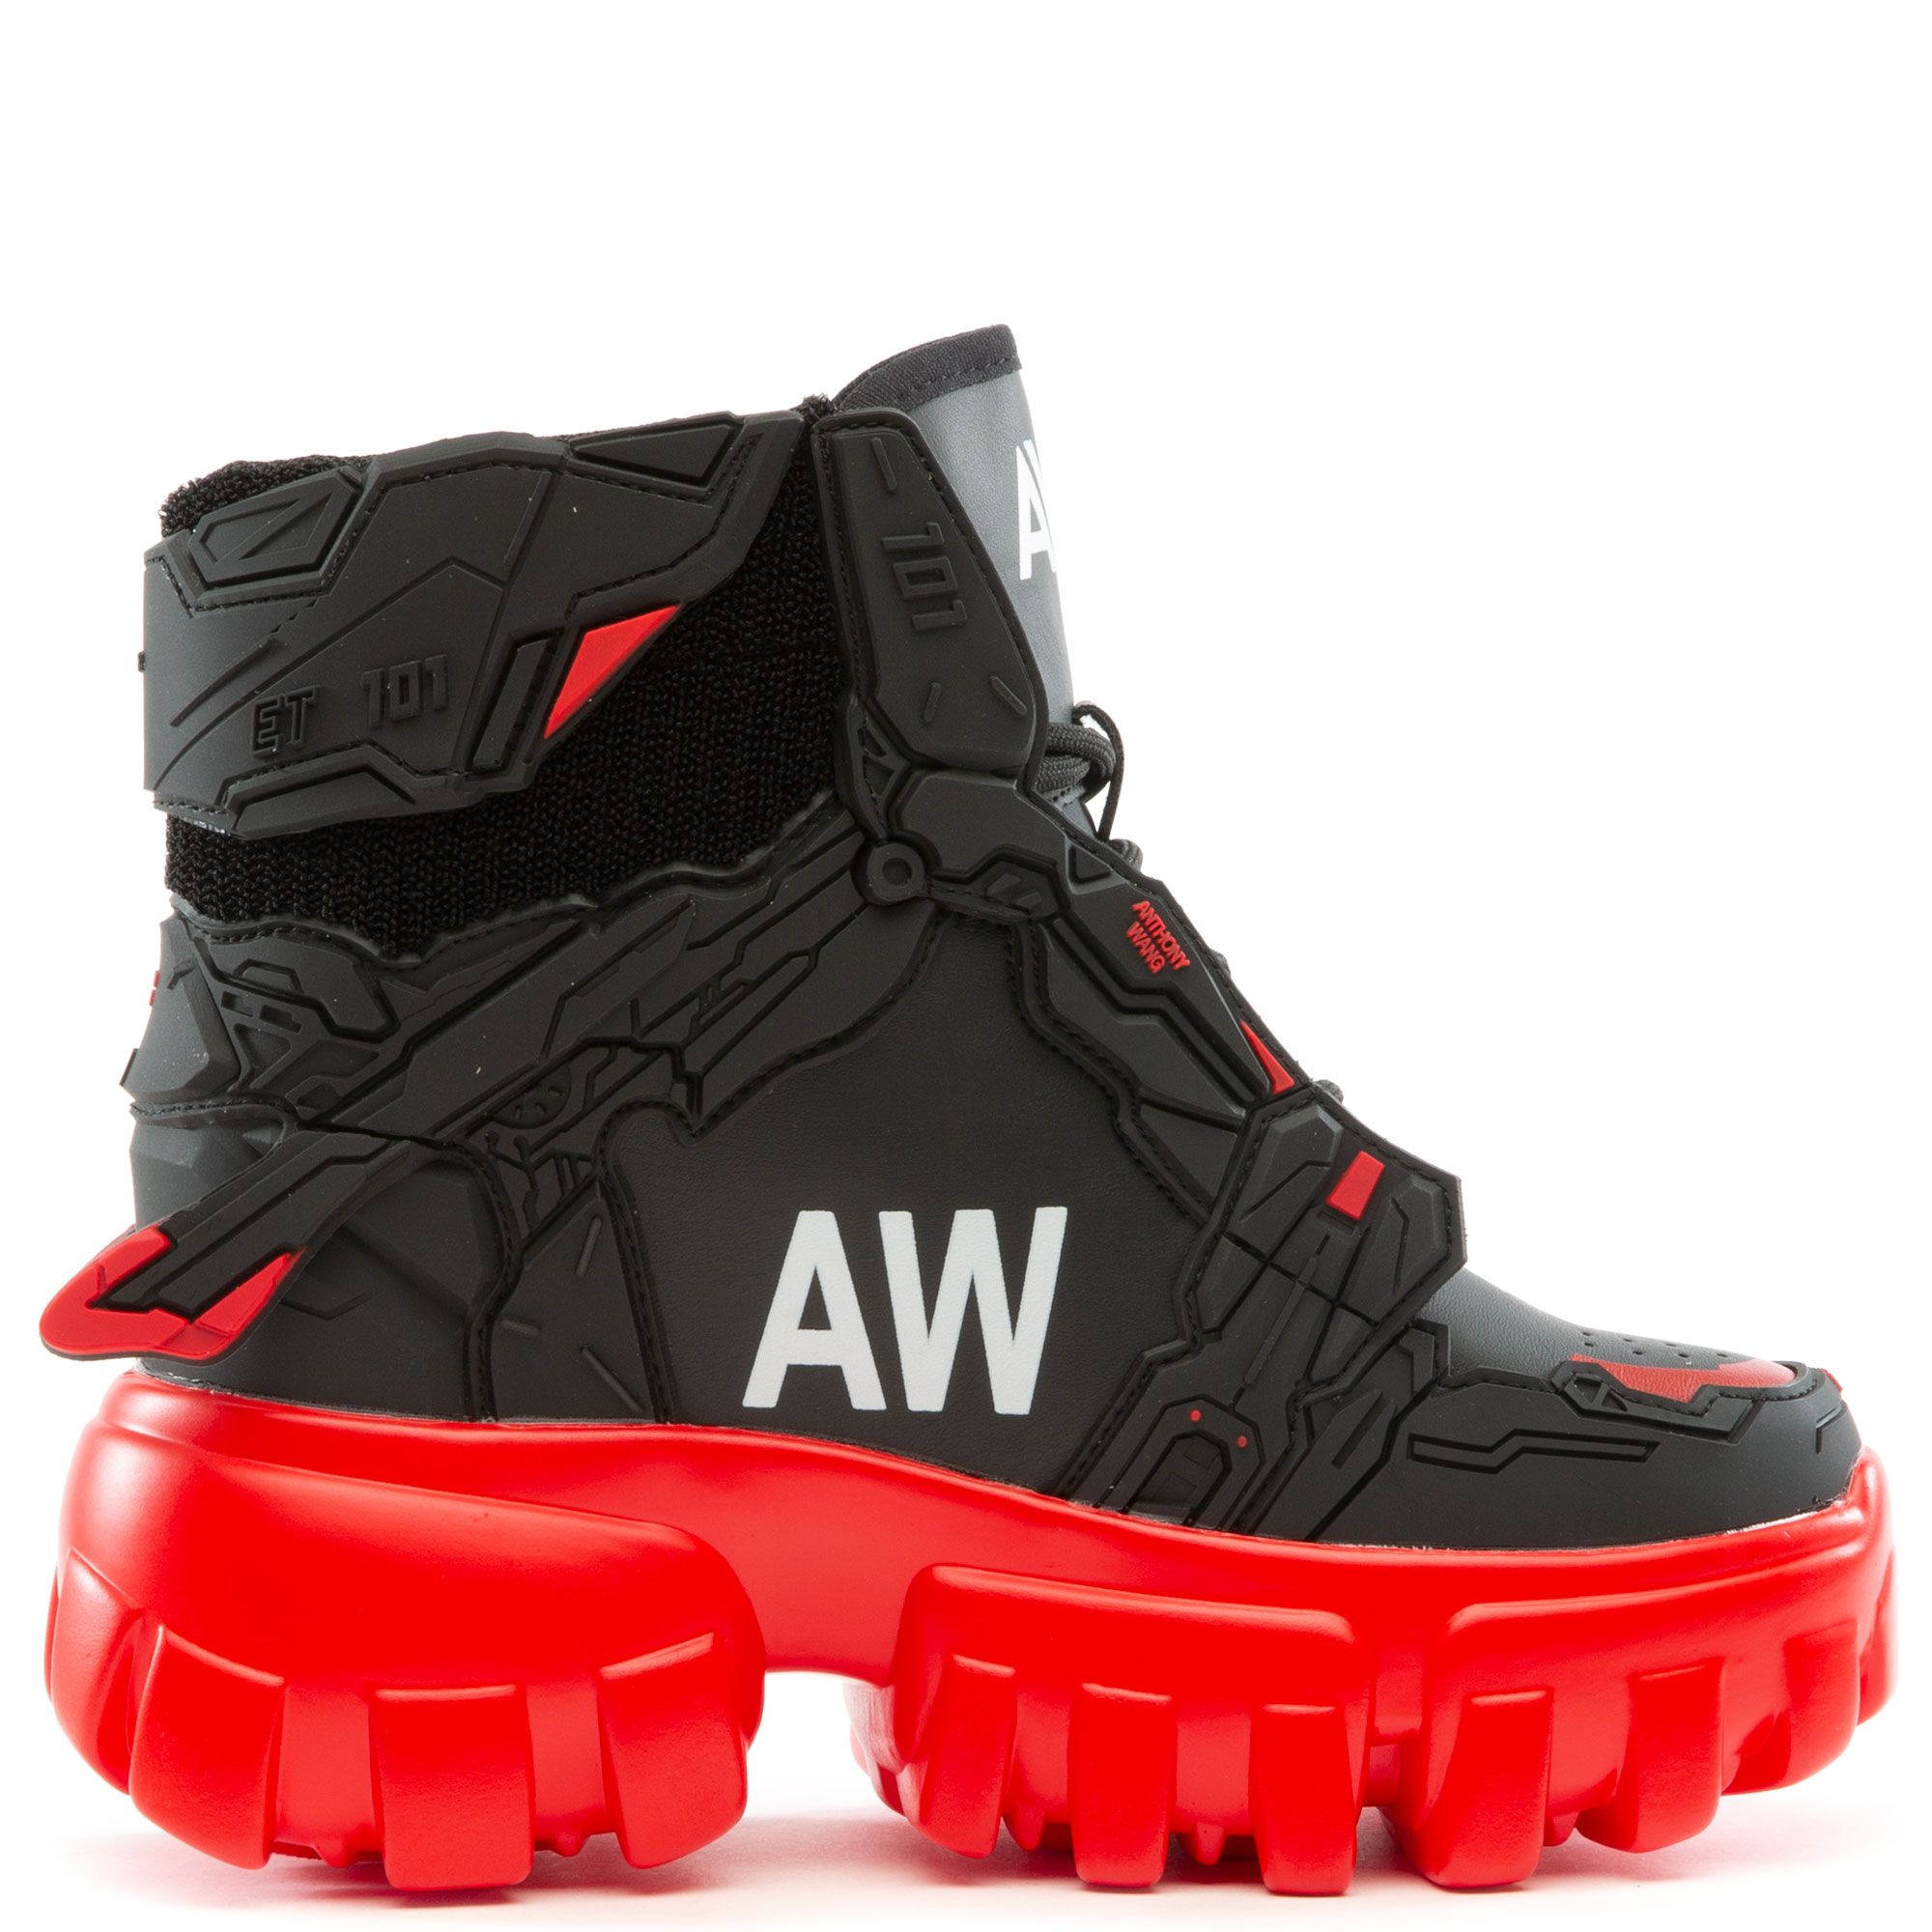 ANTHONY WANG Sour Diesel- Heel Combat Boots SOUR DIESEL-RED - Shiekh